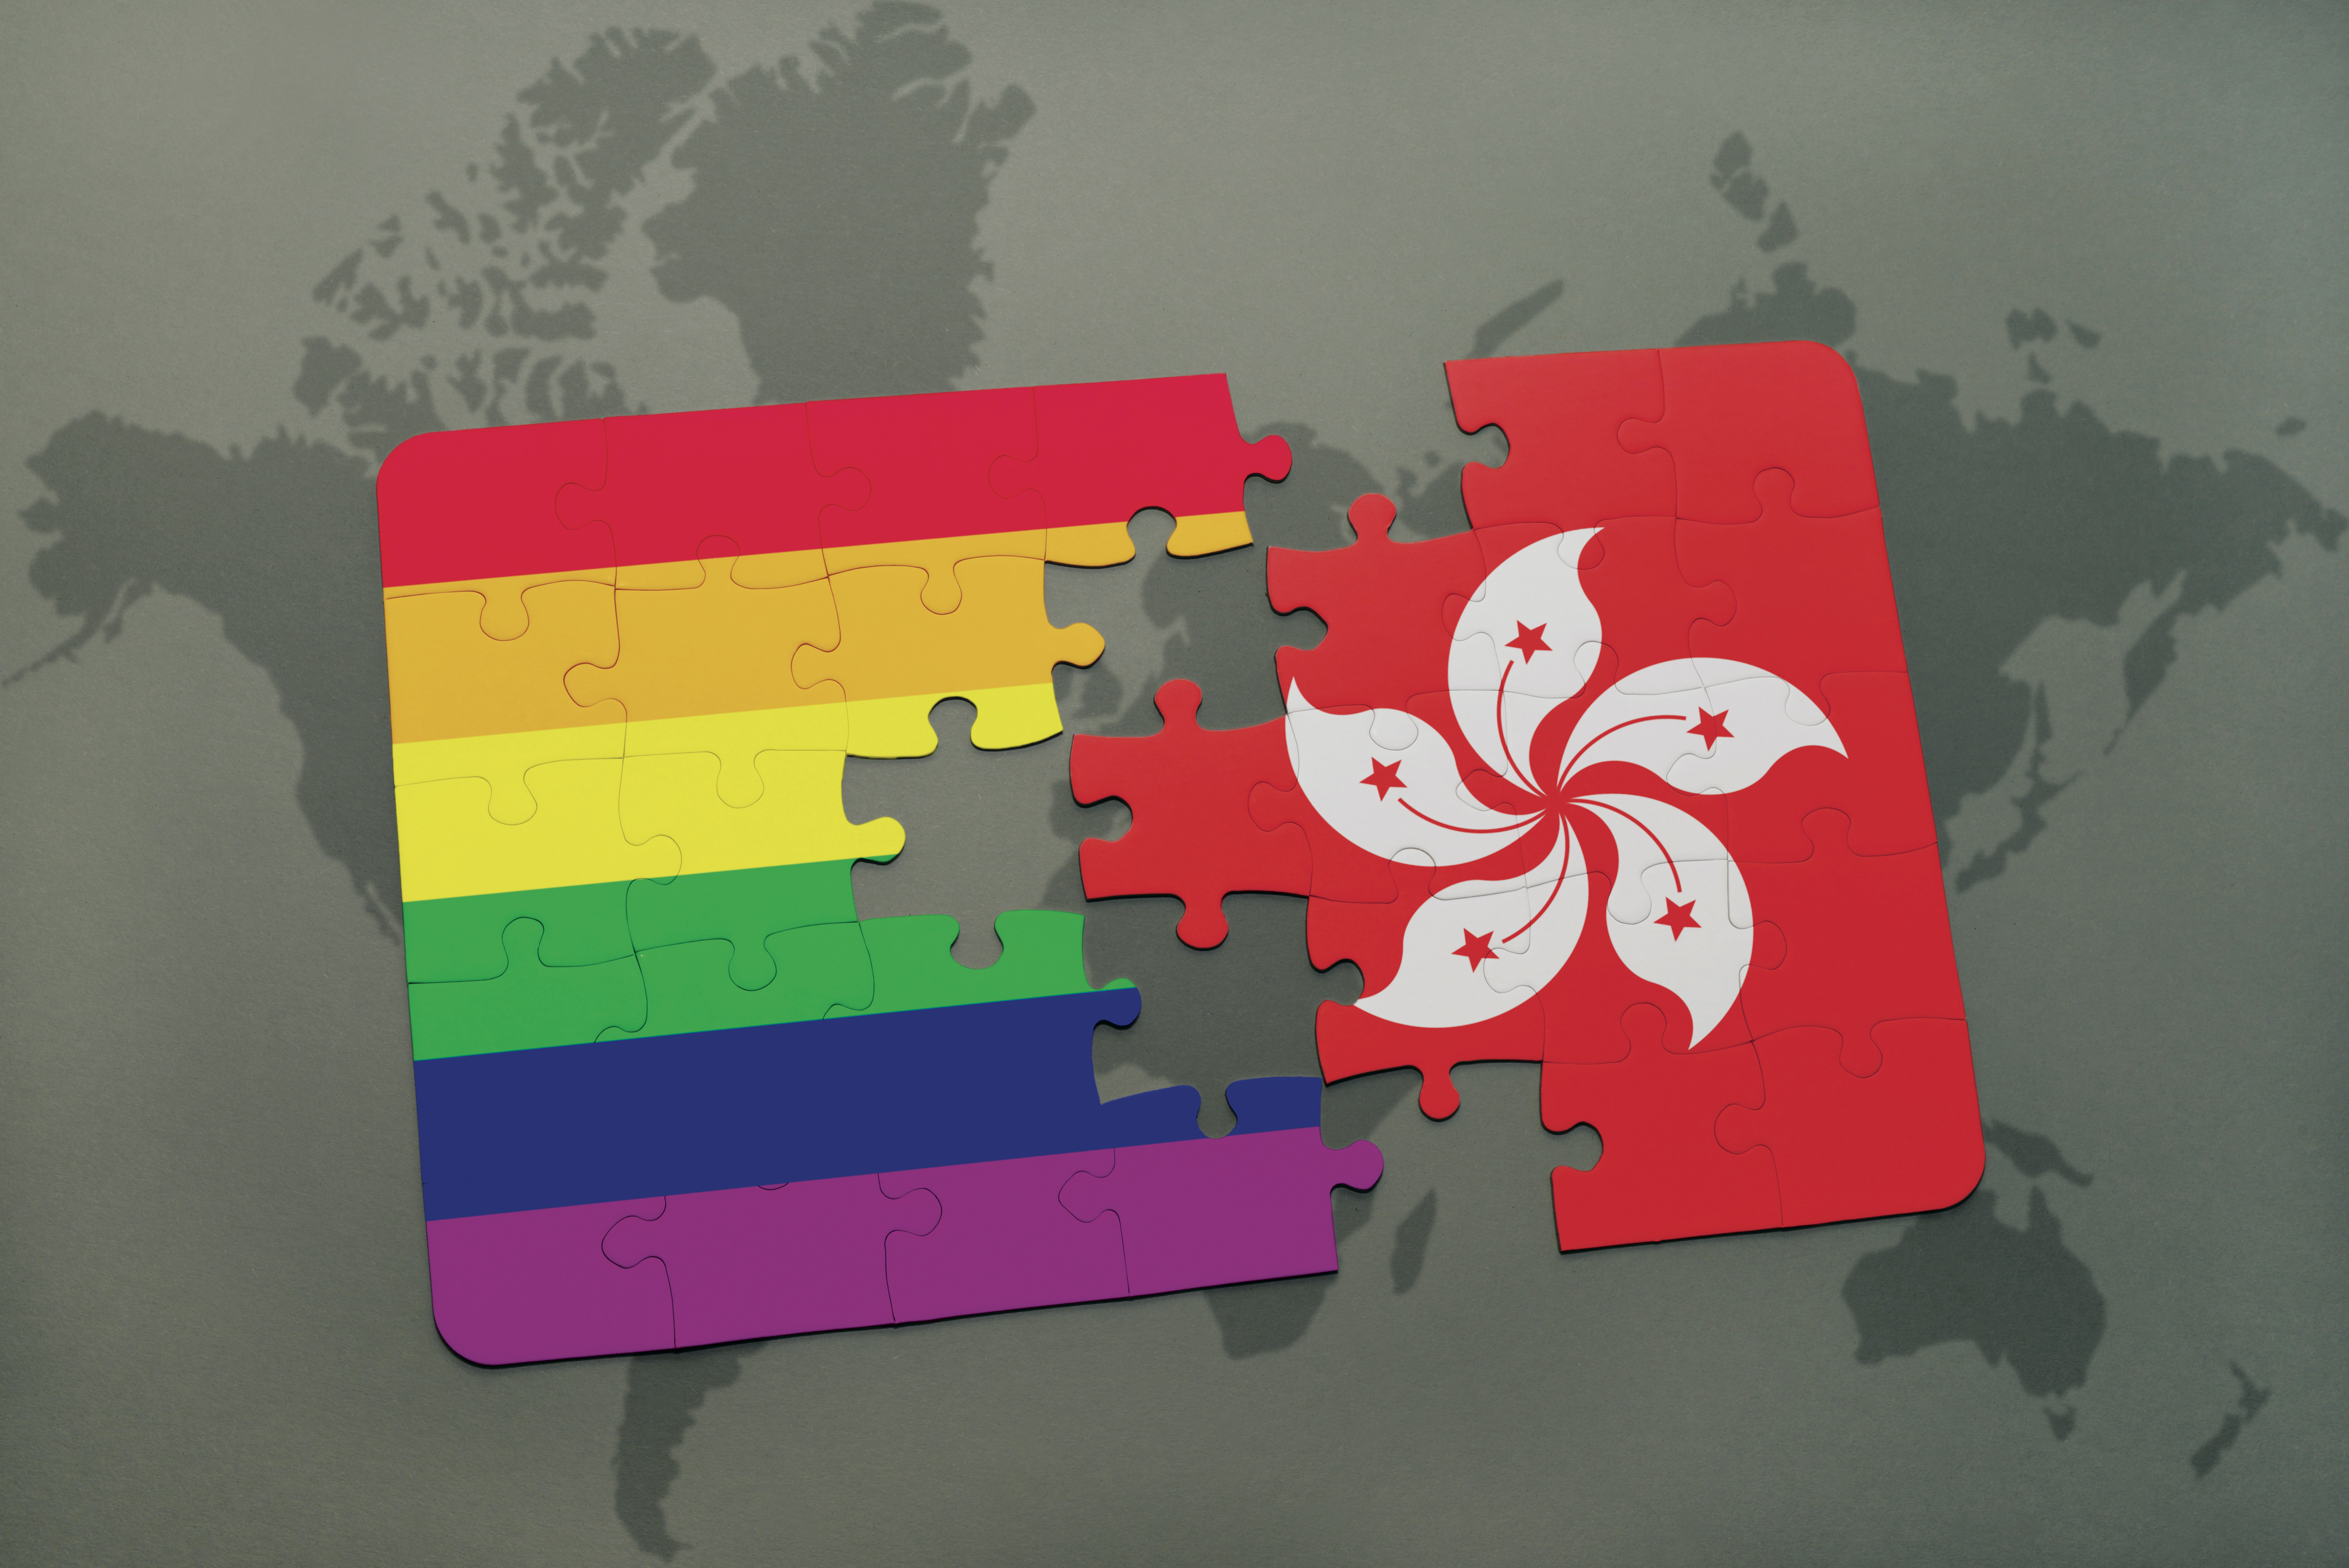 University of Hong Kong poll finds 50 per cent of respondents back right of gay couples to wed, while support on other issues hits nearly 80 per cent